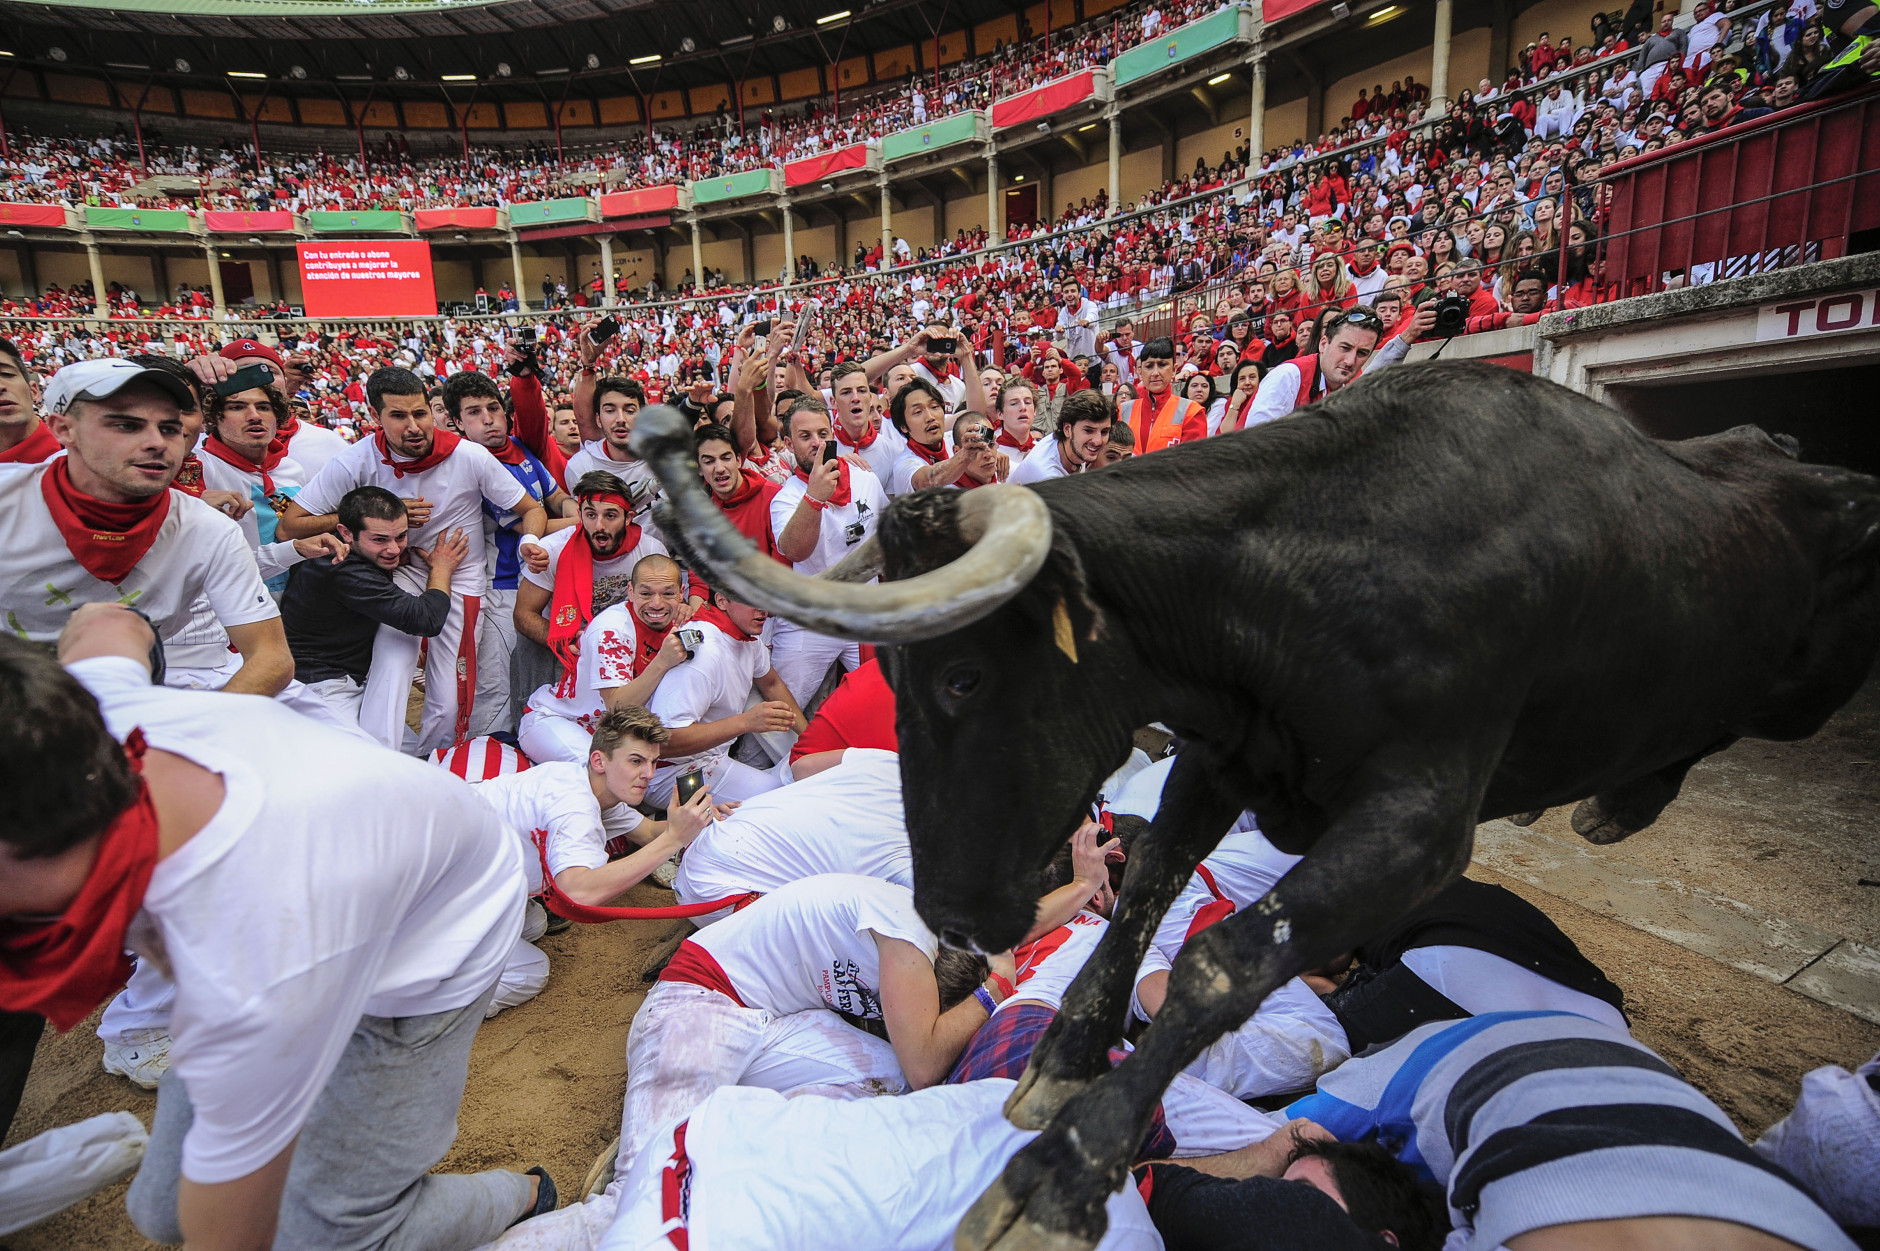 FOR USE AS DESIRED, YEAR END PHOTOS - FILE - A cow jumps over revelers on the bull ring at the San Fermin festival, in Pamplona, Spain, Tuesday, July 8, 2014. Revelers from around the world in Pamplona take part in an eight-day event of the running of the bulls glorified by Ernest Hemingway's 1926 novel "The Sun Also Rises." (AP Photo/Alvaro Barrientos, File)